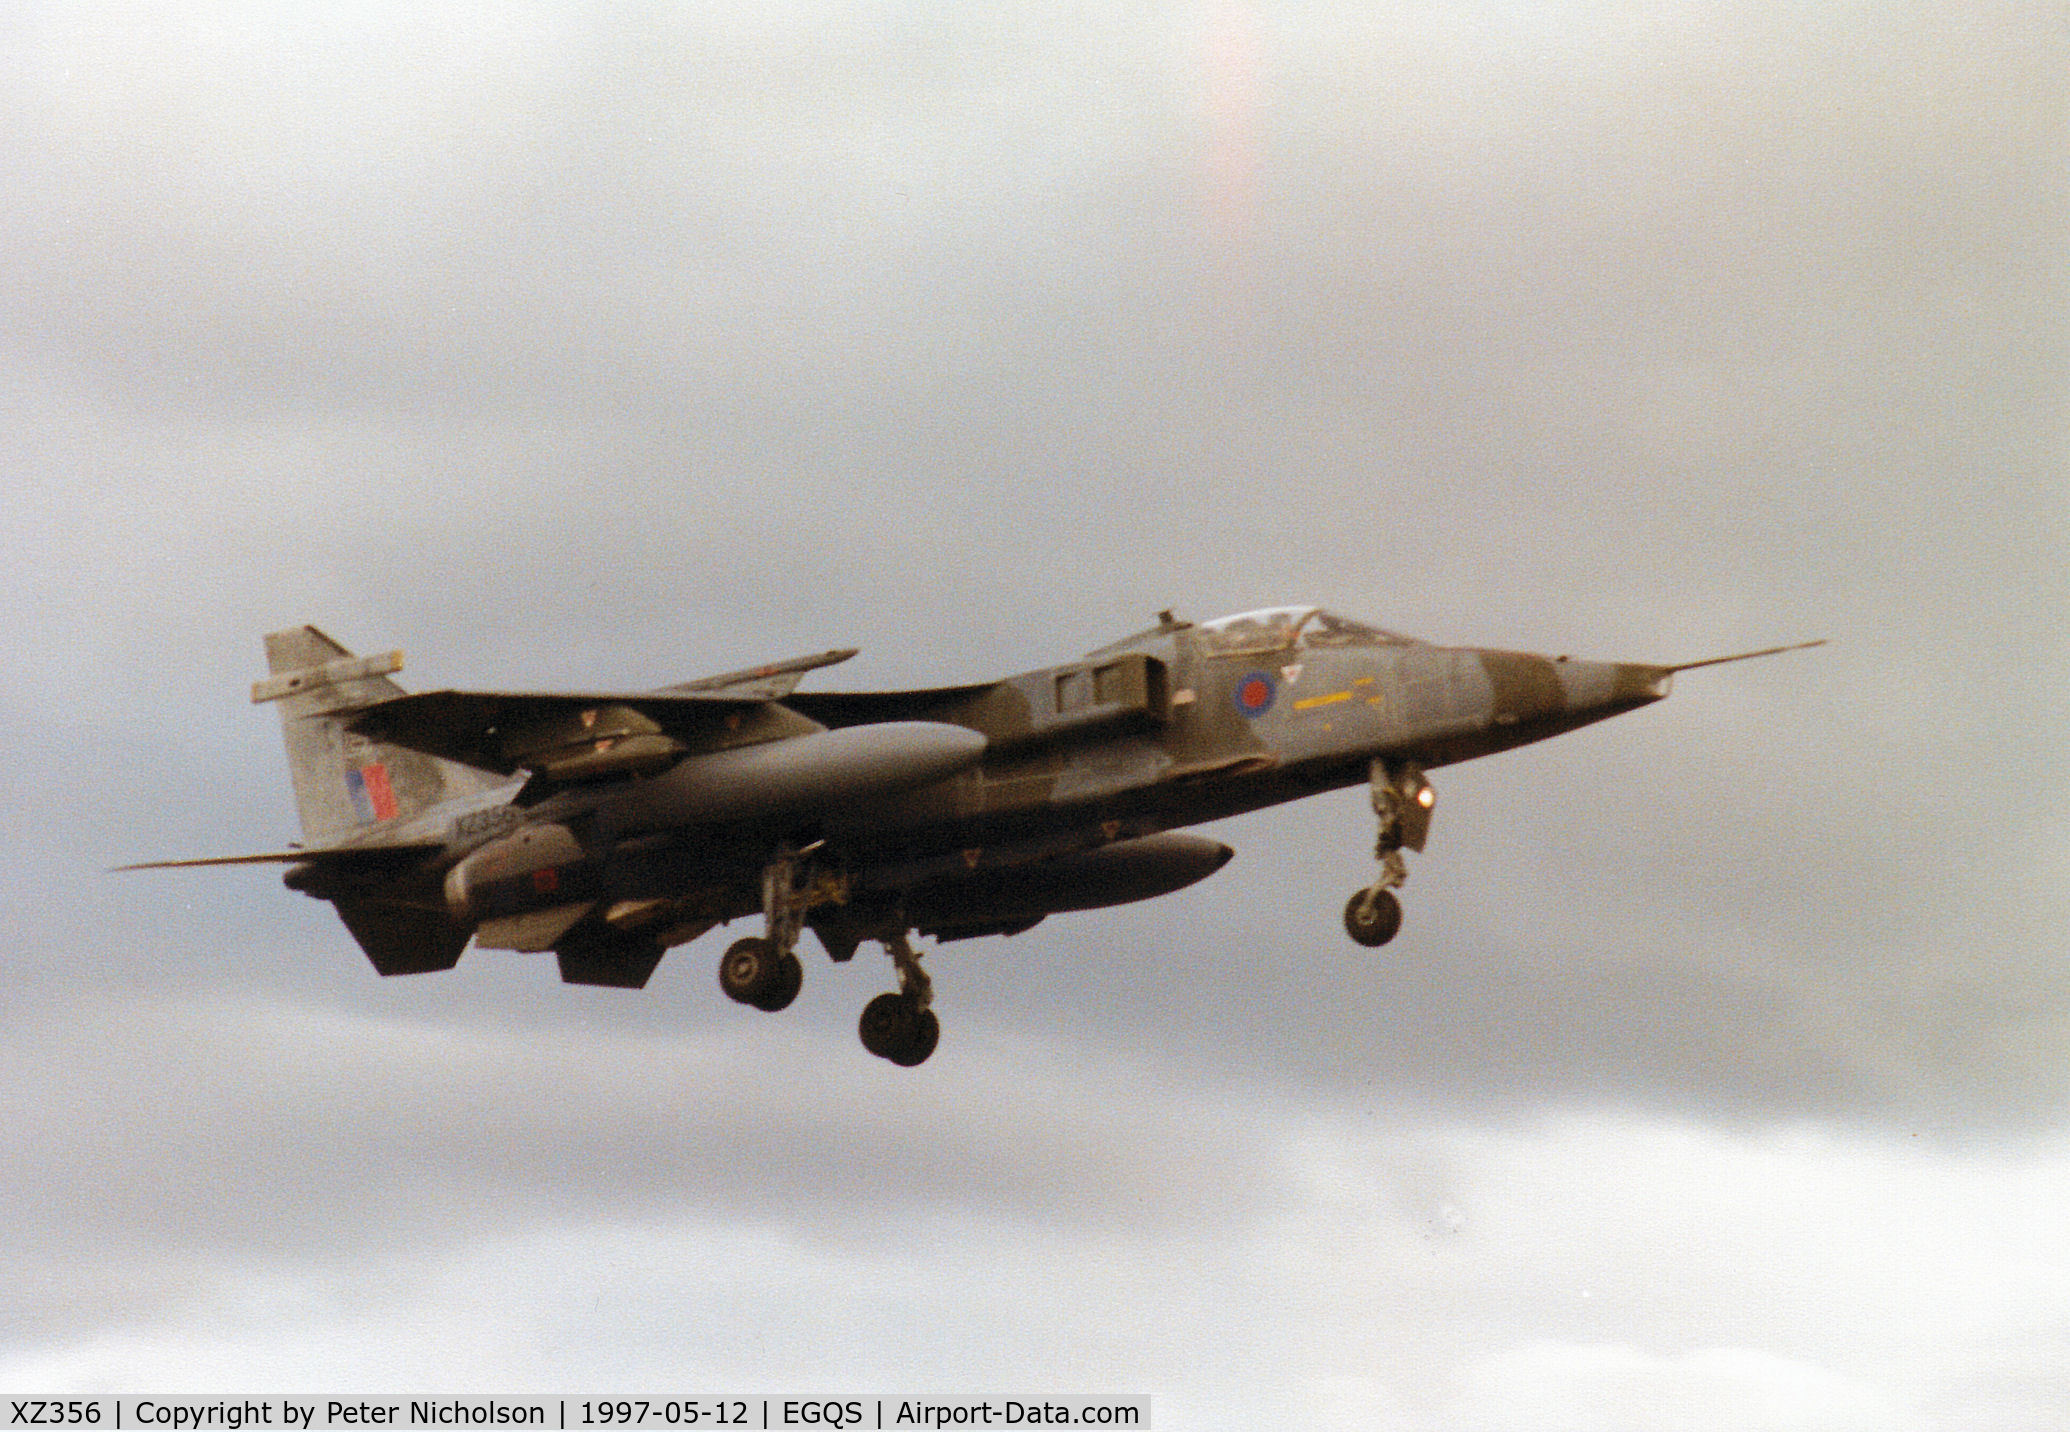 XZ356, 1976 Sepecat Jaguar GR.1A C/N S.123, Jaguar GR.1A, callsign Boxer 7, of 6 Squadron at RAF Coltishall on final approach to Runway 05 at RAF Lossiemouth in the Summer of 1997.